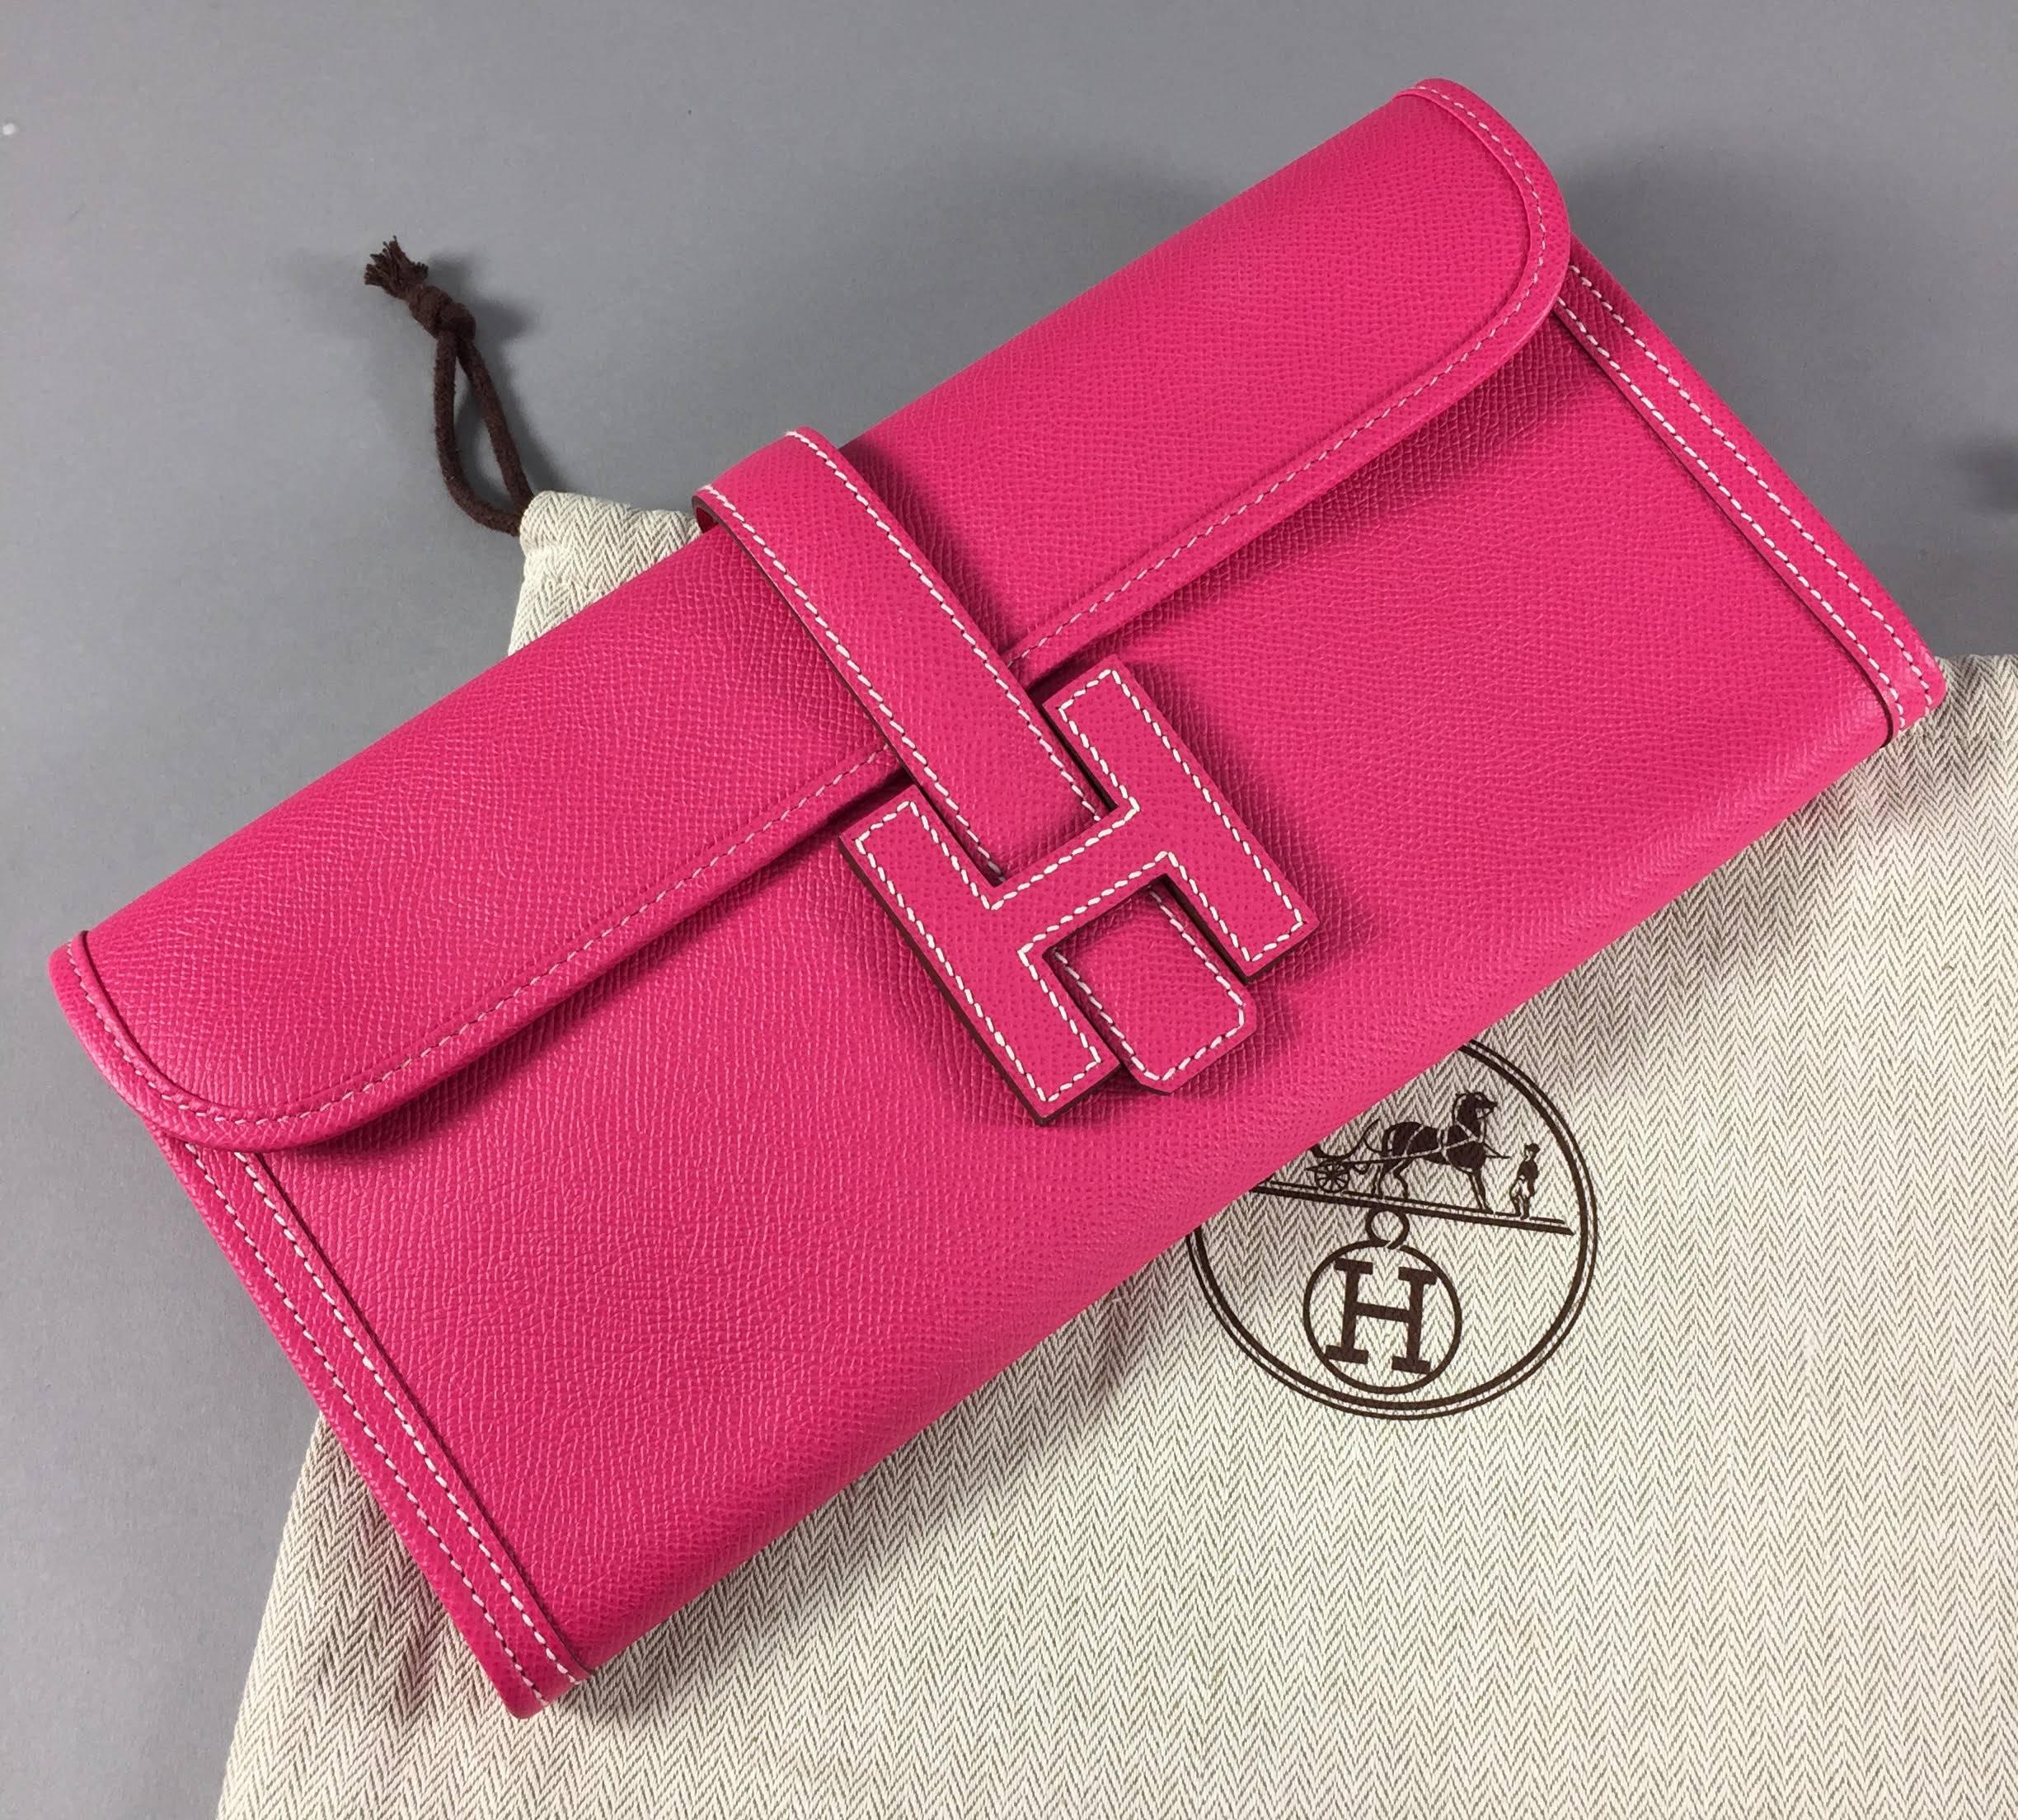 Hermes bright fuchsia pink Jige clutch. Excellent unused condition with original duster. Date stamp 2012. Measures 29cm long. 

We ship worldwide.  Canadian residents pay sales tax based on destination province.